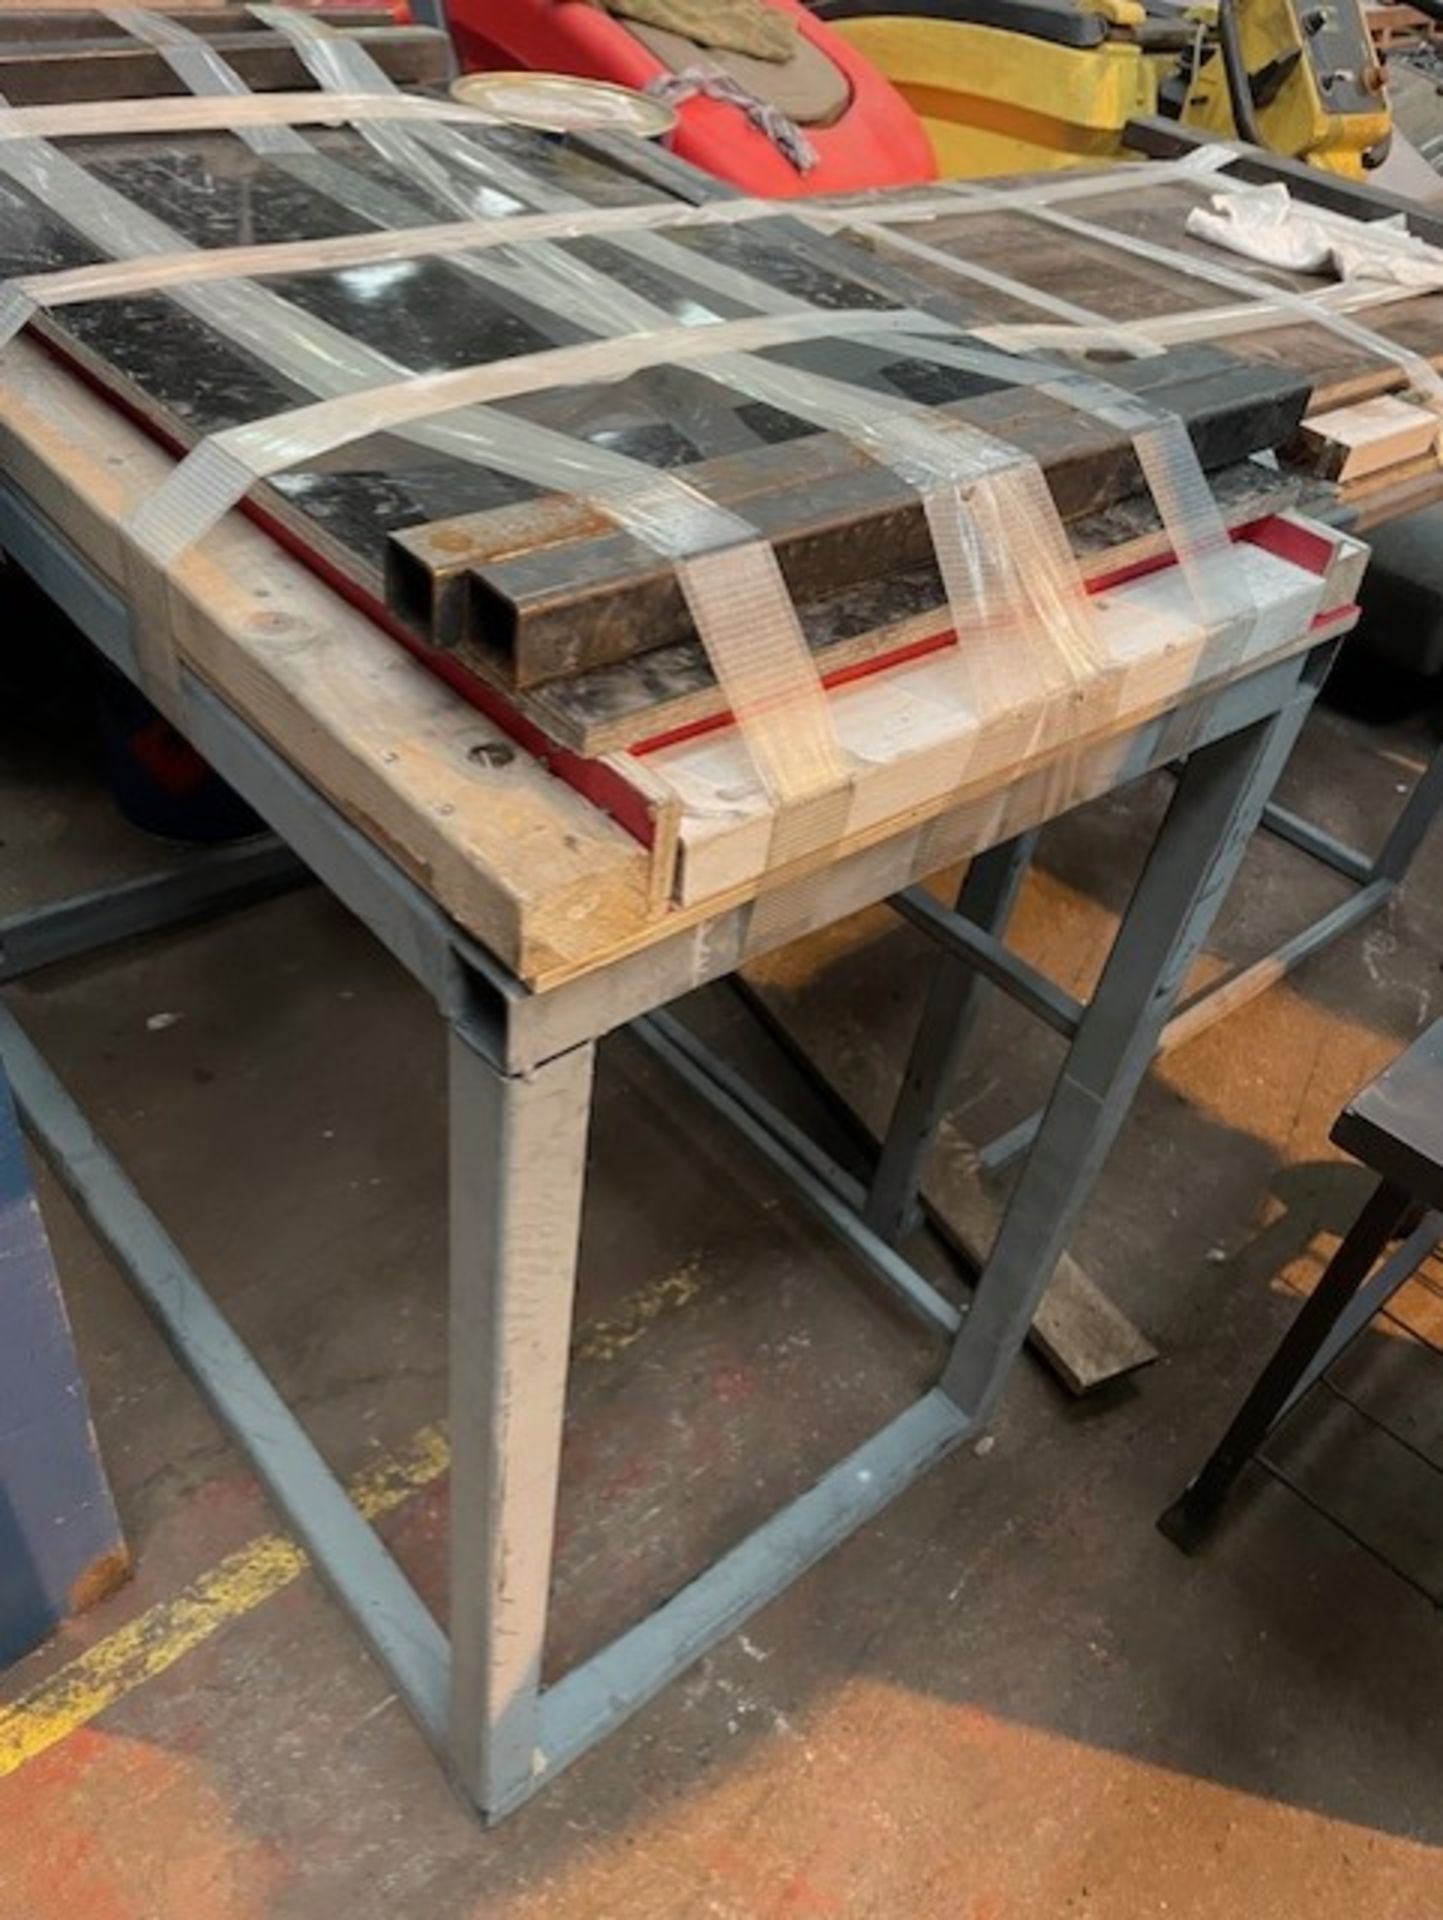 Fibre glass panel making tables 4 of them in total change the mould to suit whatever you are making - Image 3 of 6